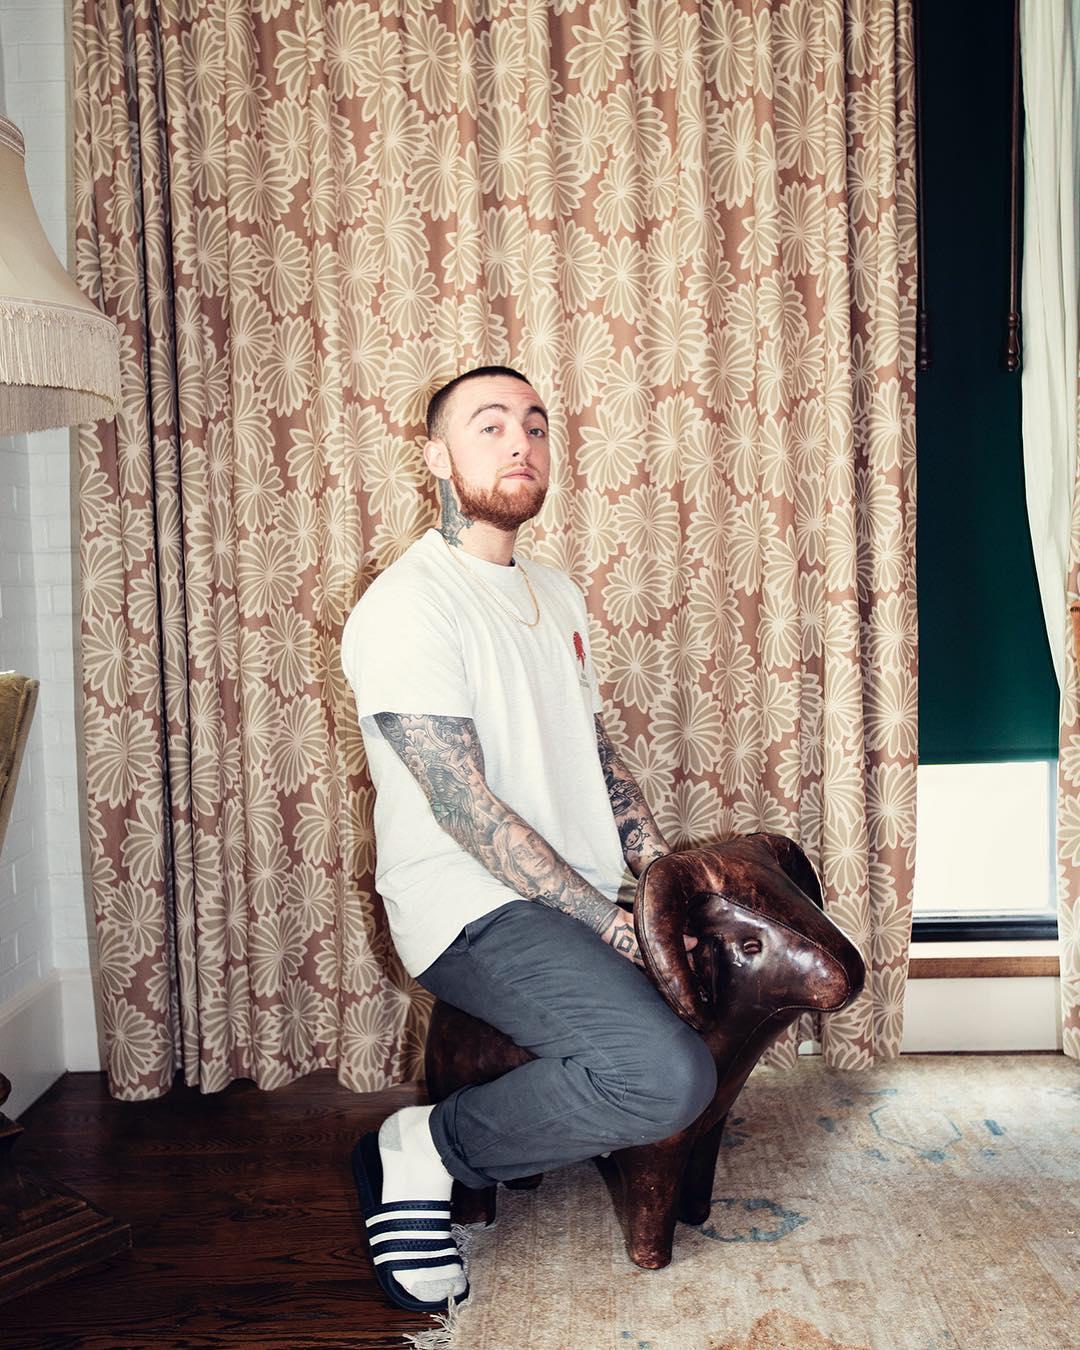 A photo showing Mac Miller in a white shirt and black pant.